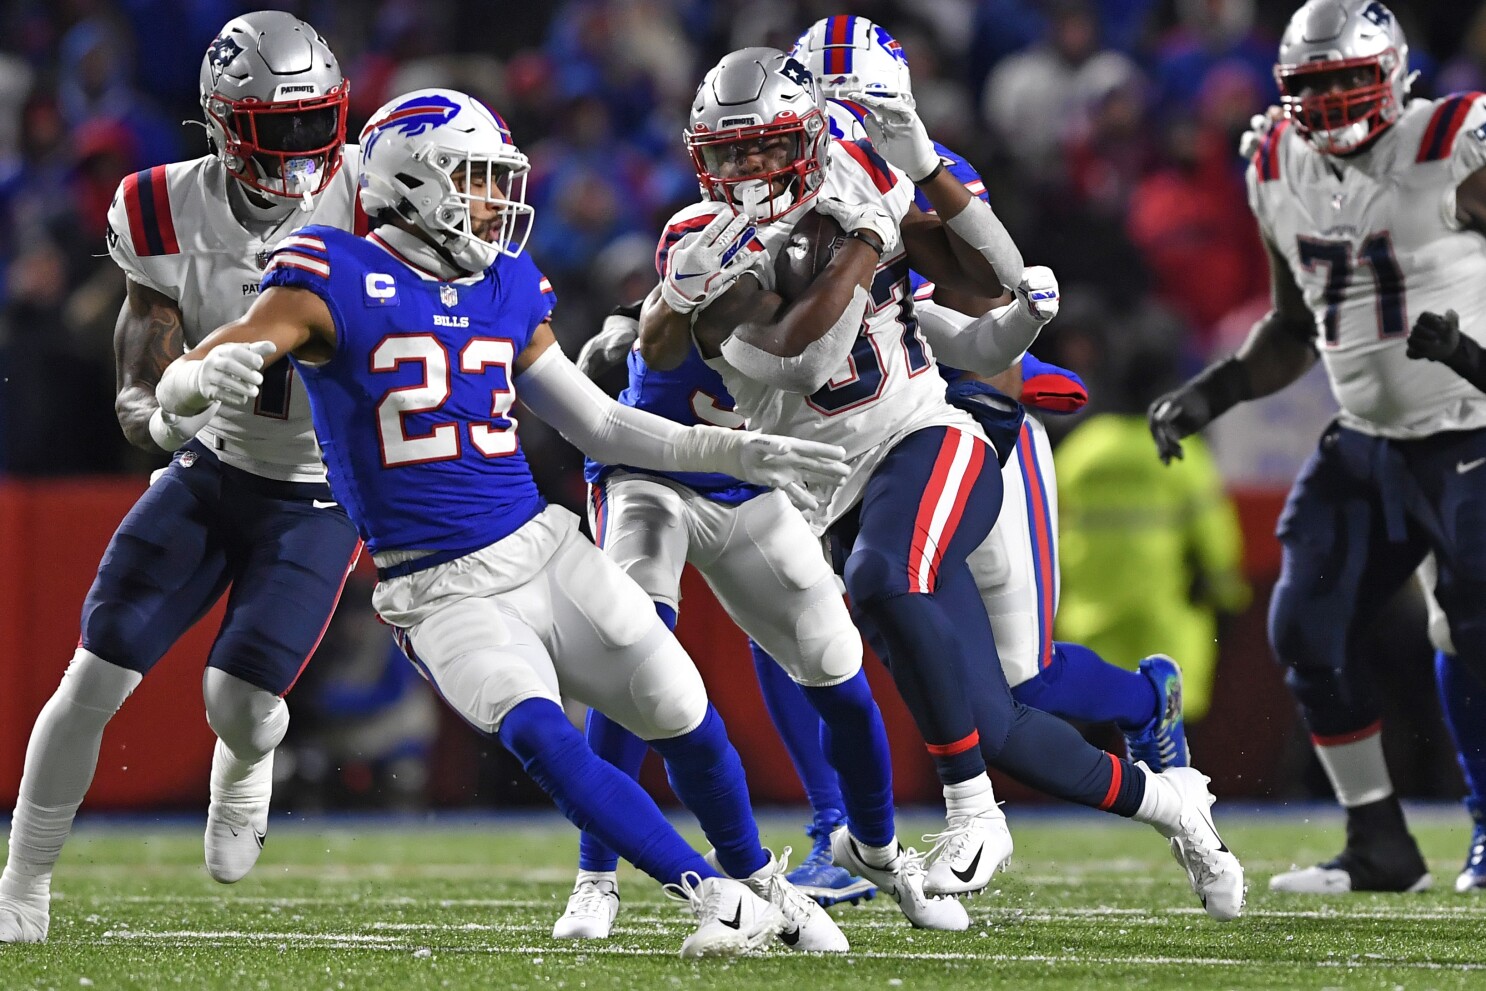 attempt only three passes in beating Bills - Los Angeles Times